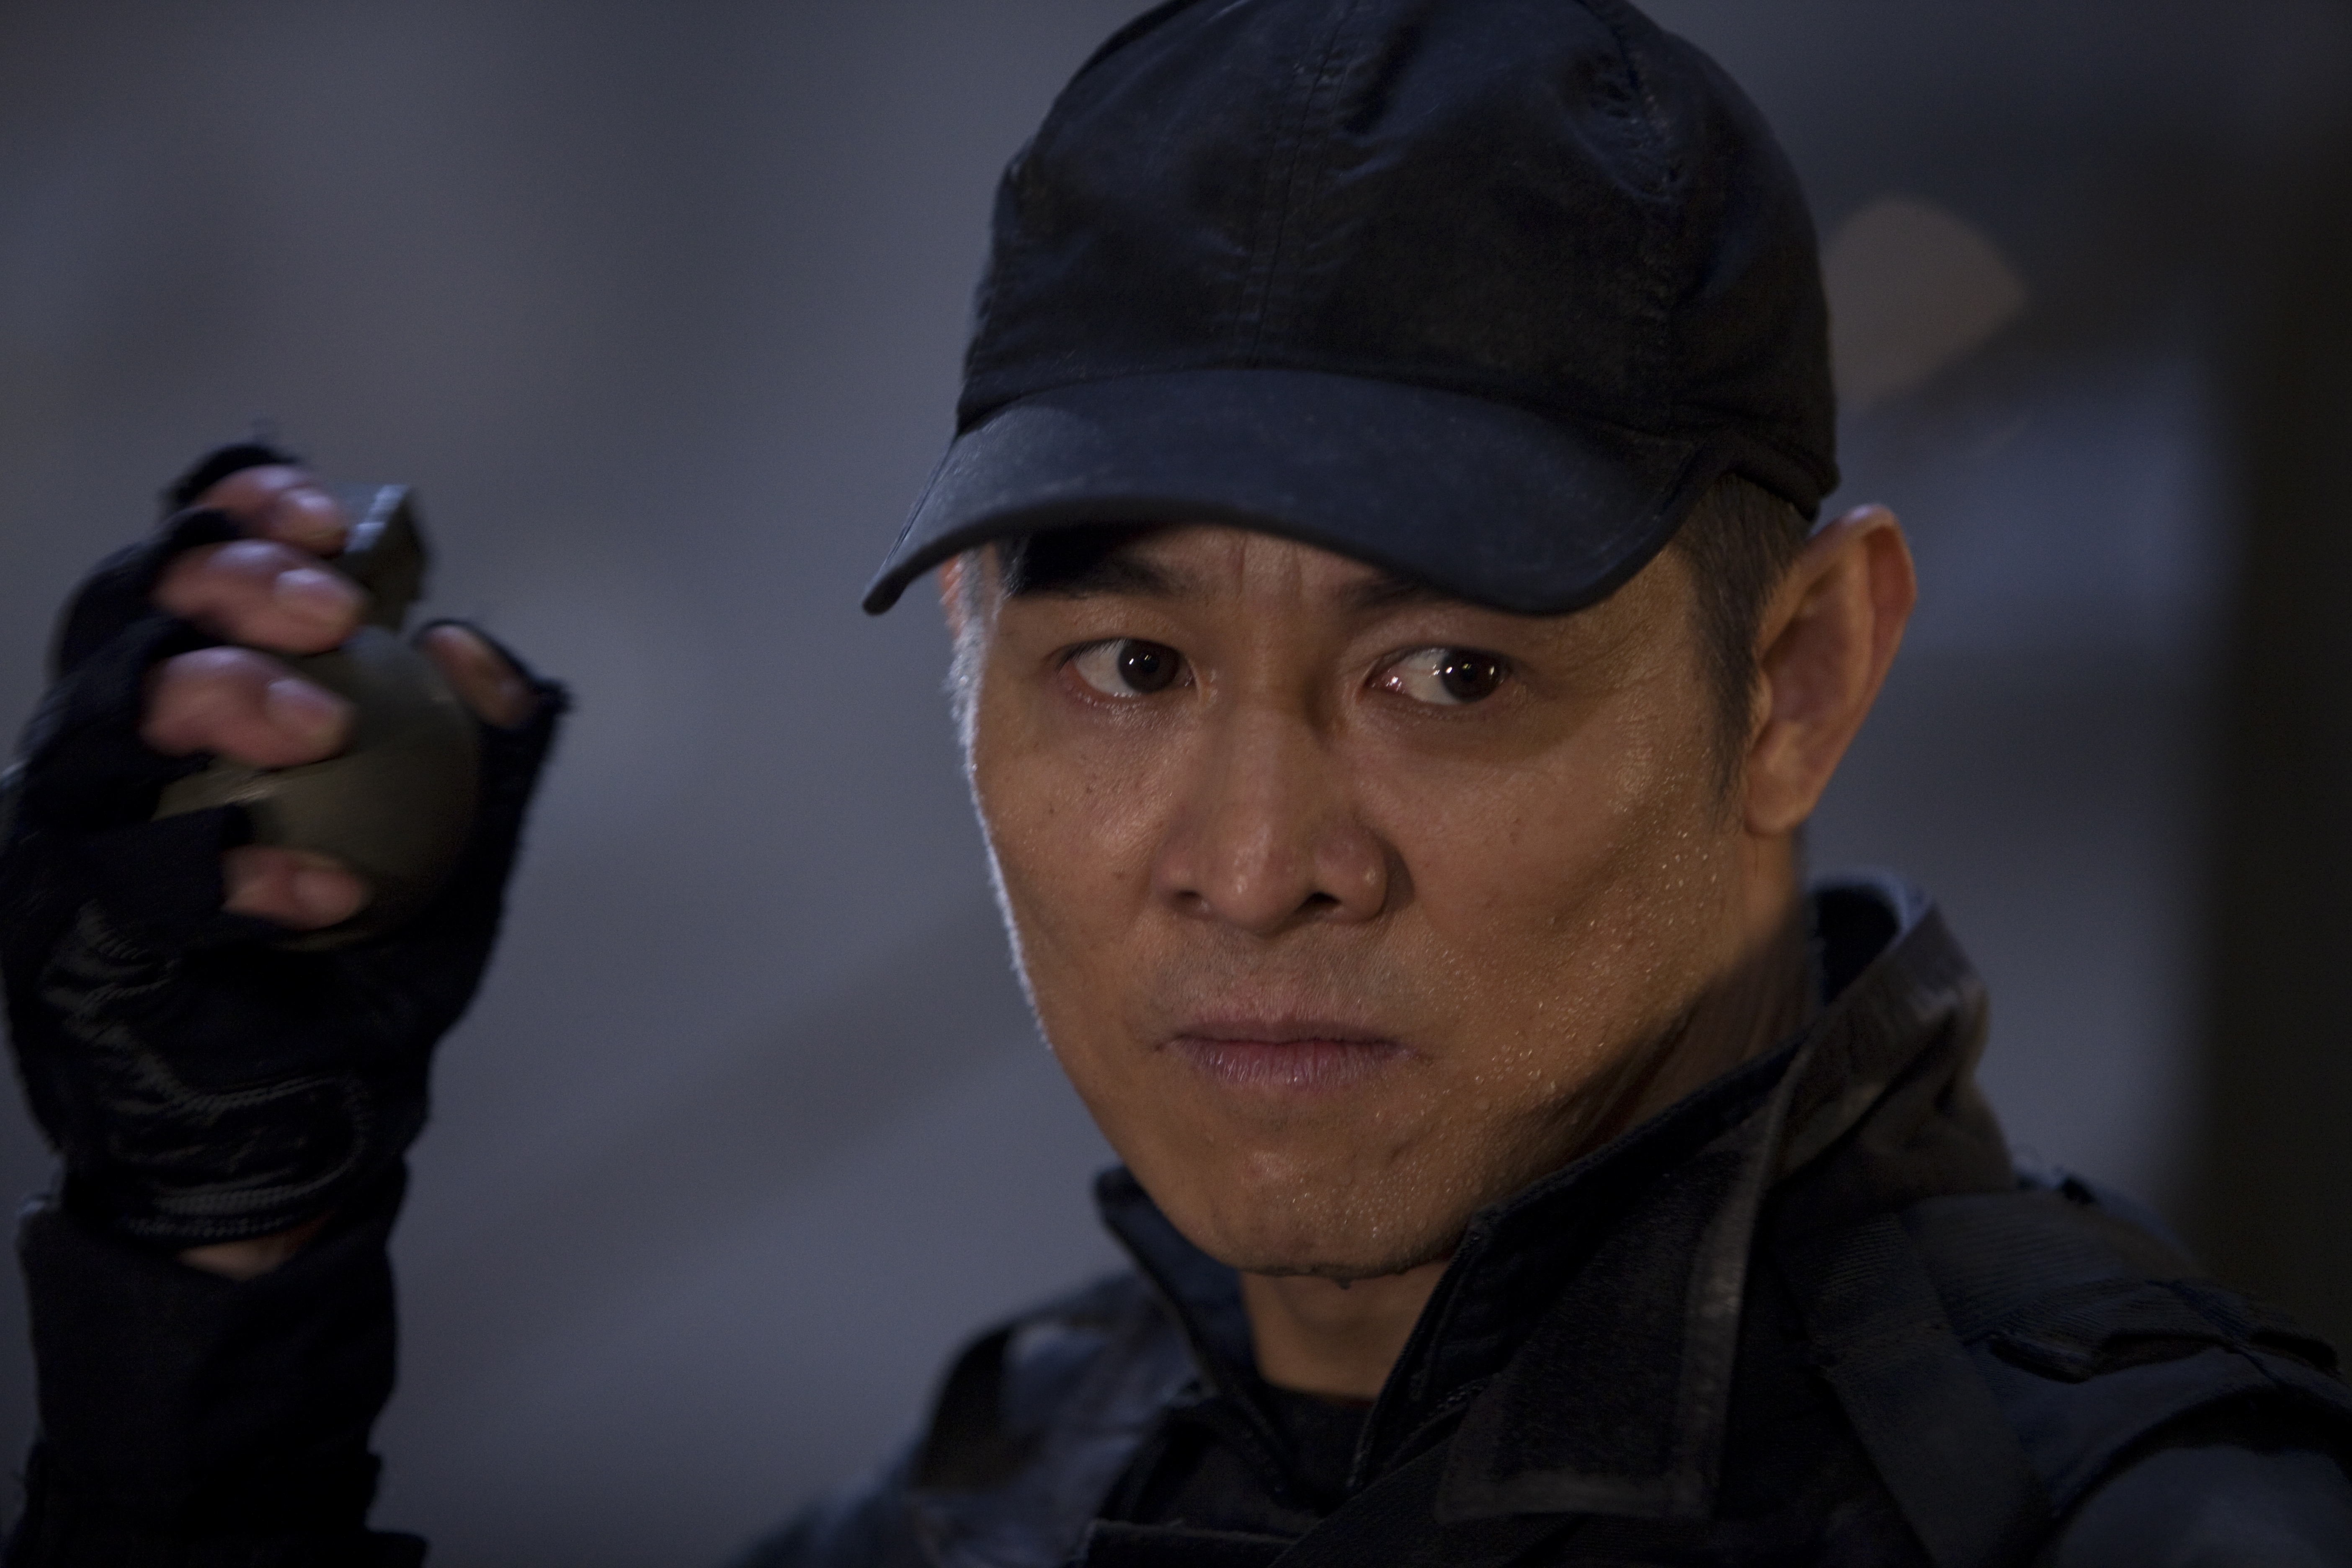 The Expendables Yin Yang The Expendables Jet Li 5616x3744